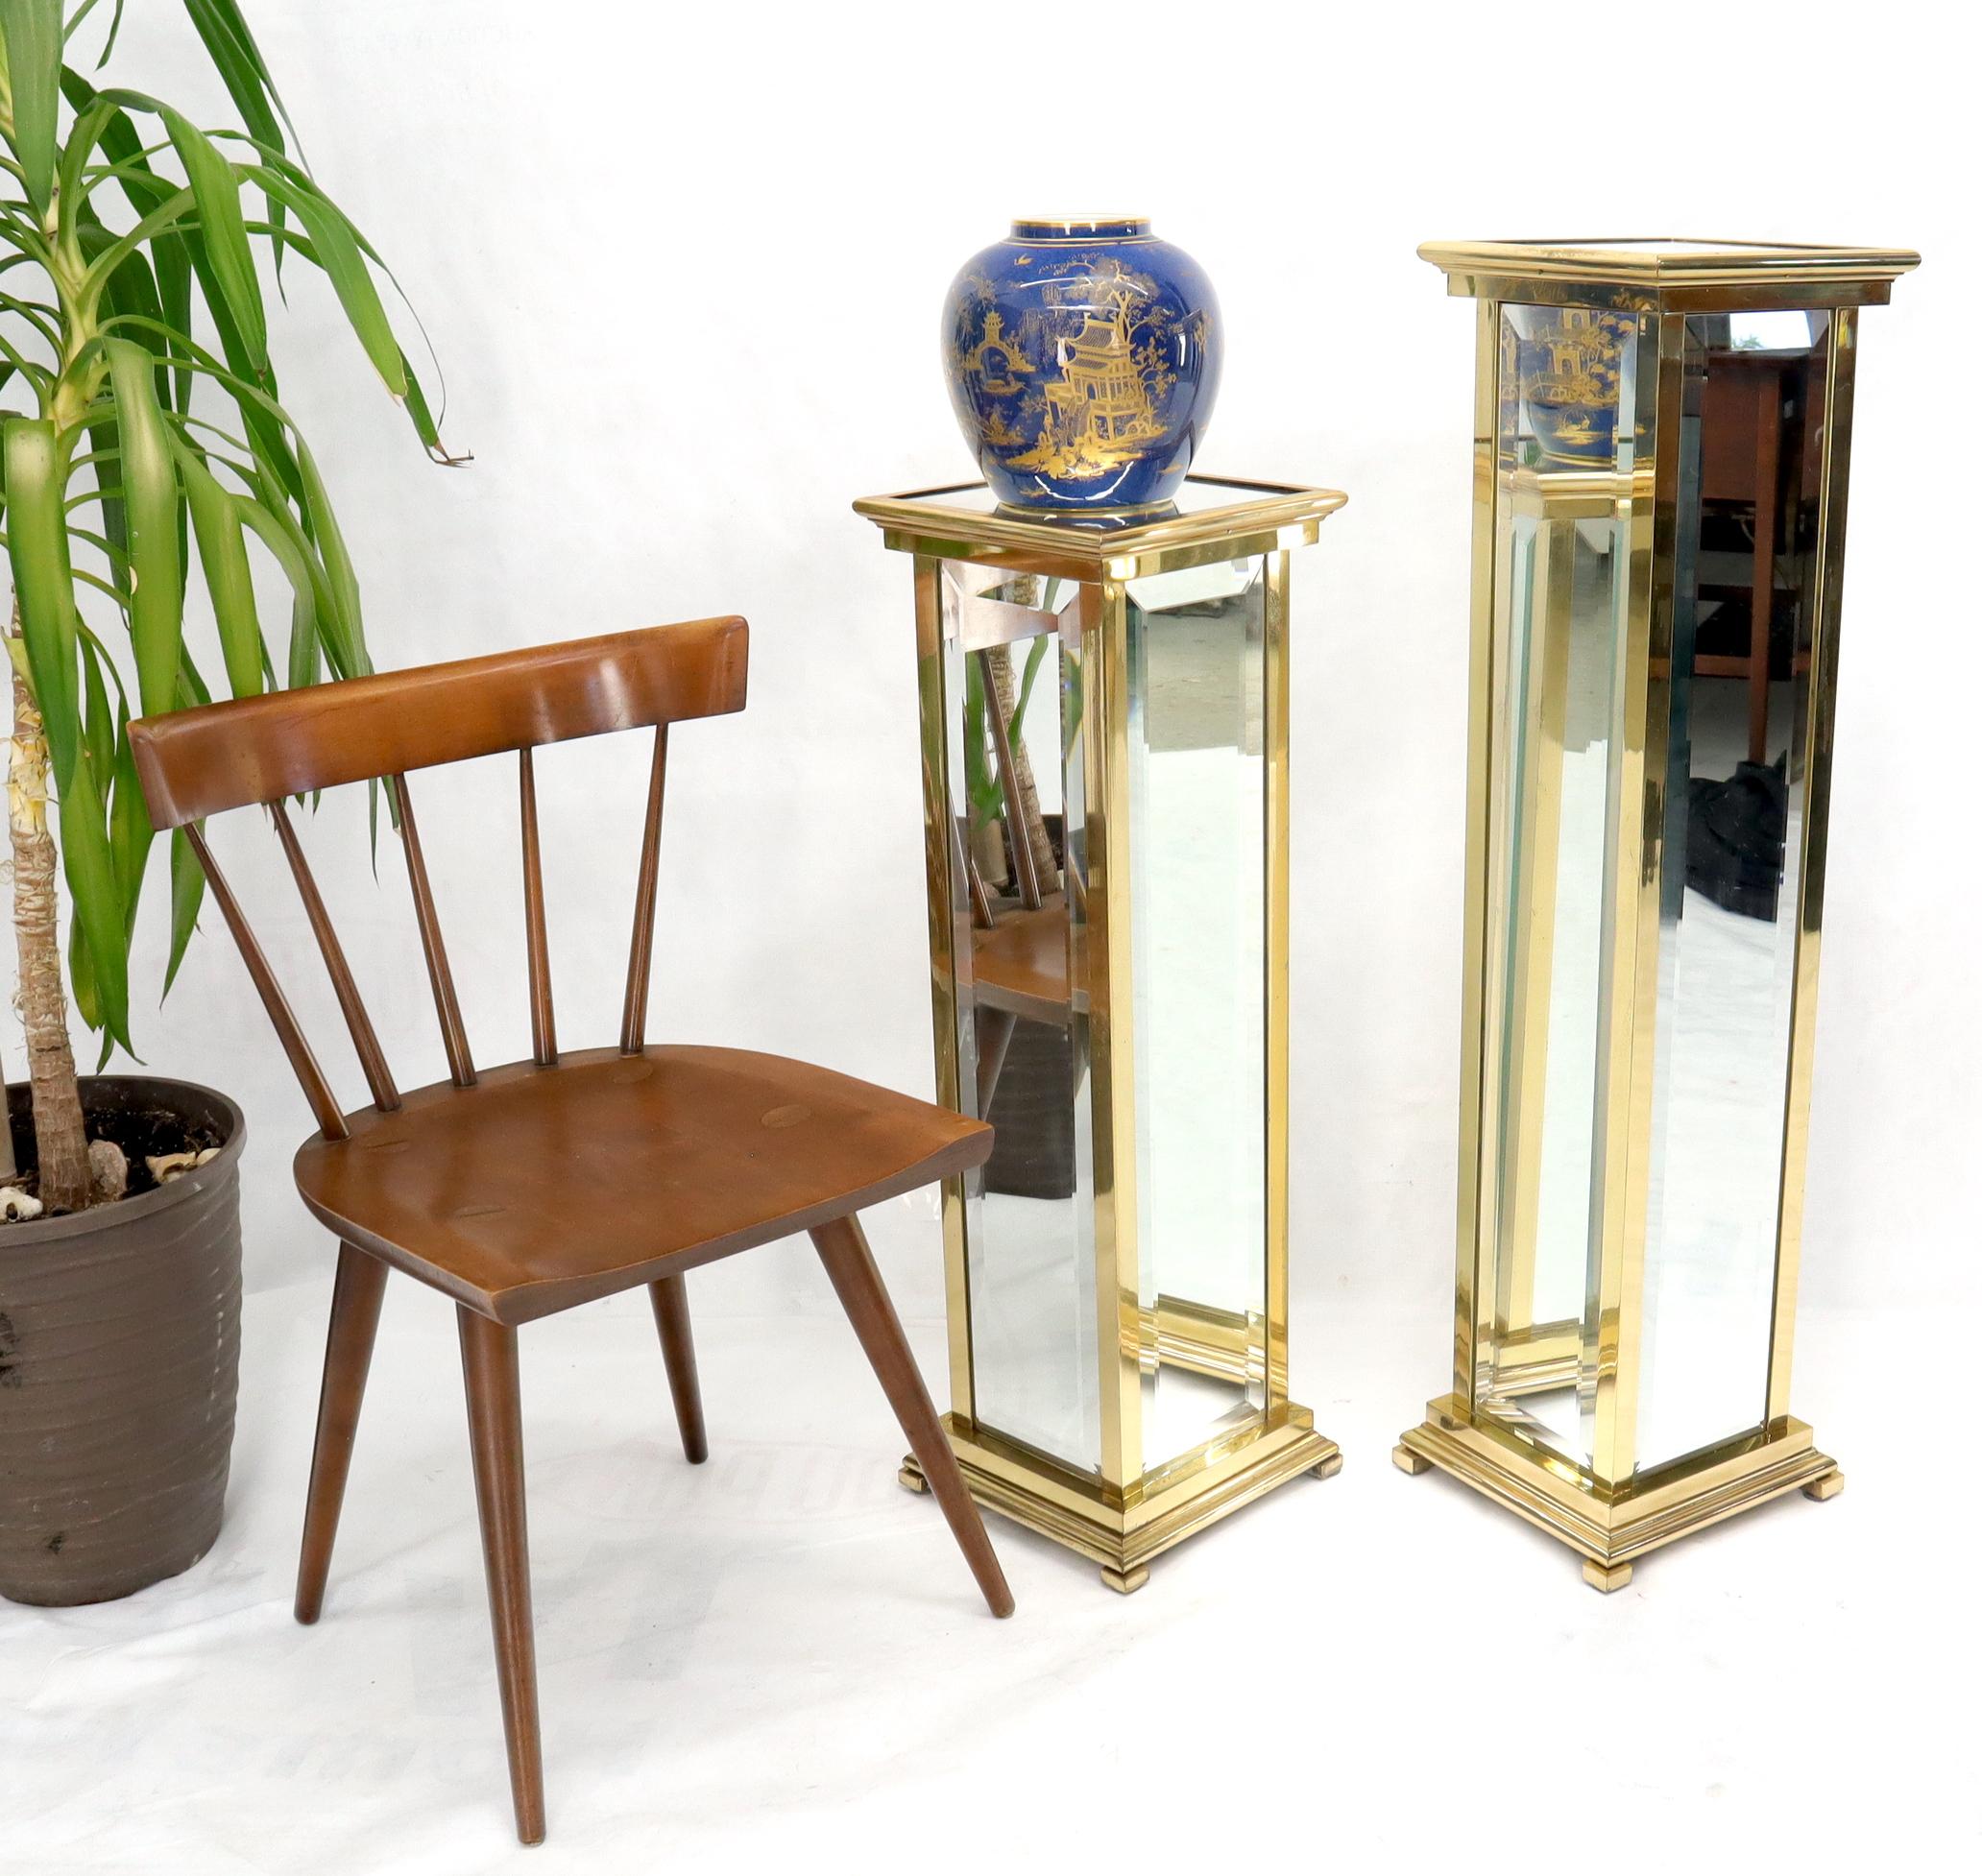 Studio custom choice of brass and mirror panel pedestals stands.